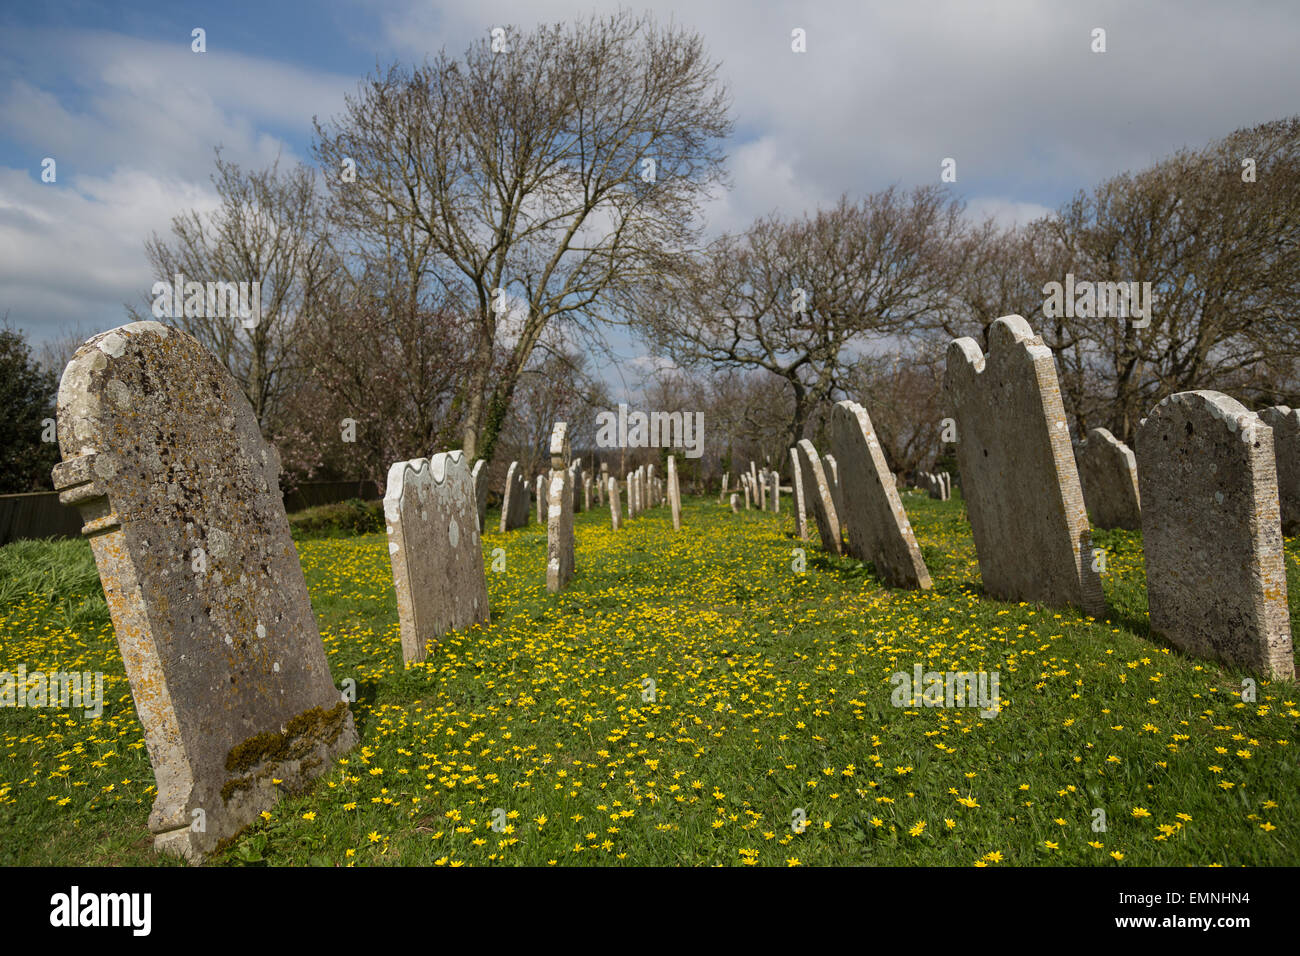 Yellow wood anemone flowers surround old gravestones in a churchyard in Godshill, the Isle of Wight Stock Photo